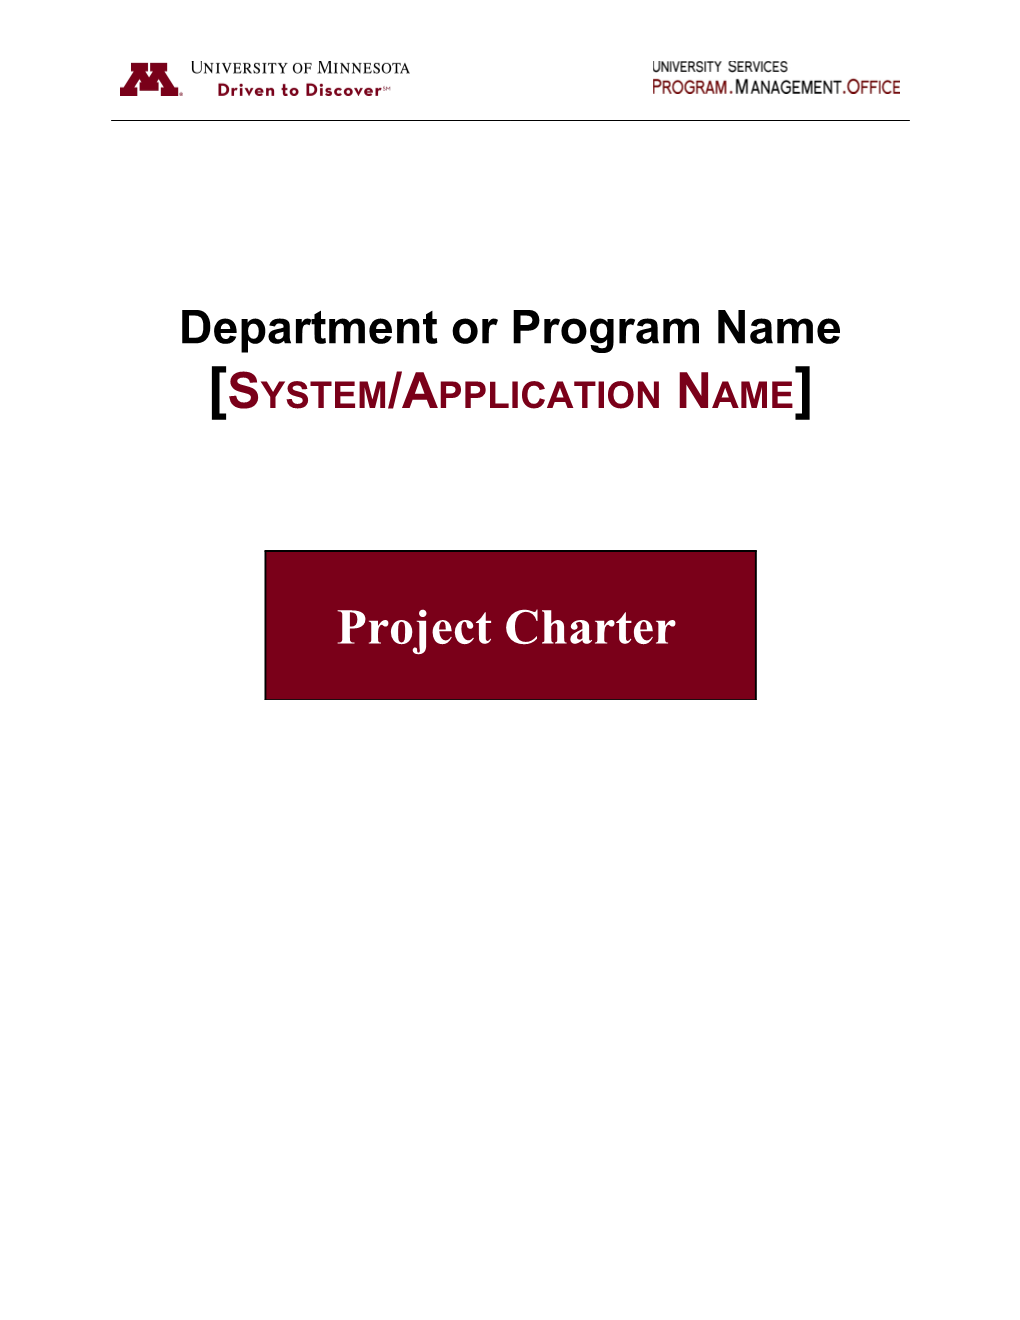 Combined Project Charter and Plan